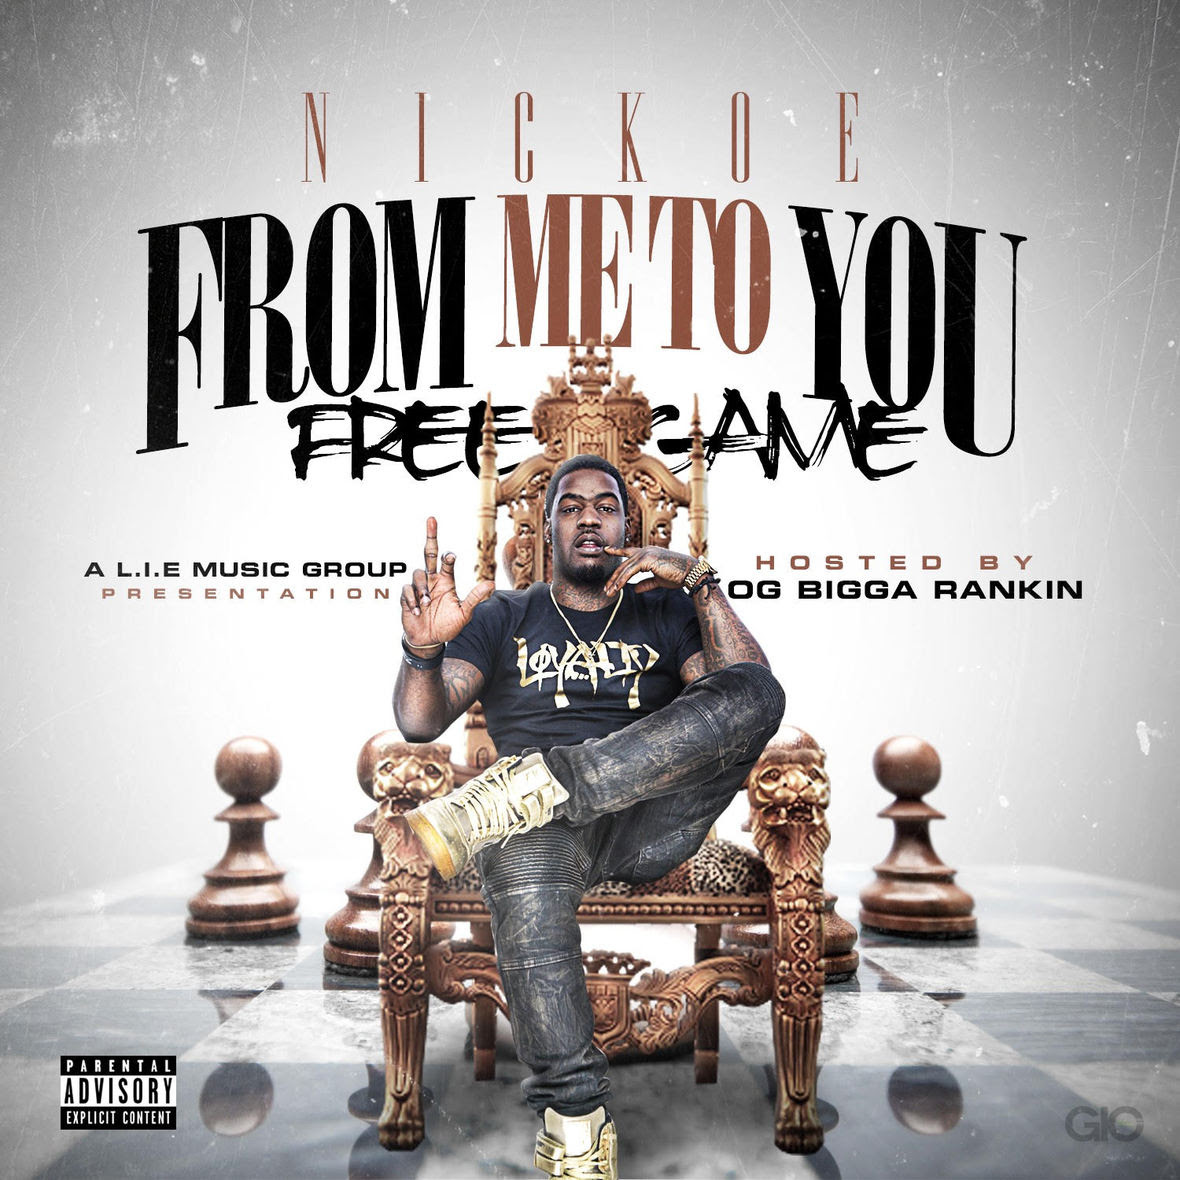 Nickoe - From Me To You FreeGame Front Cover